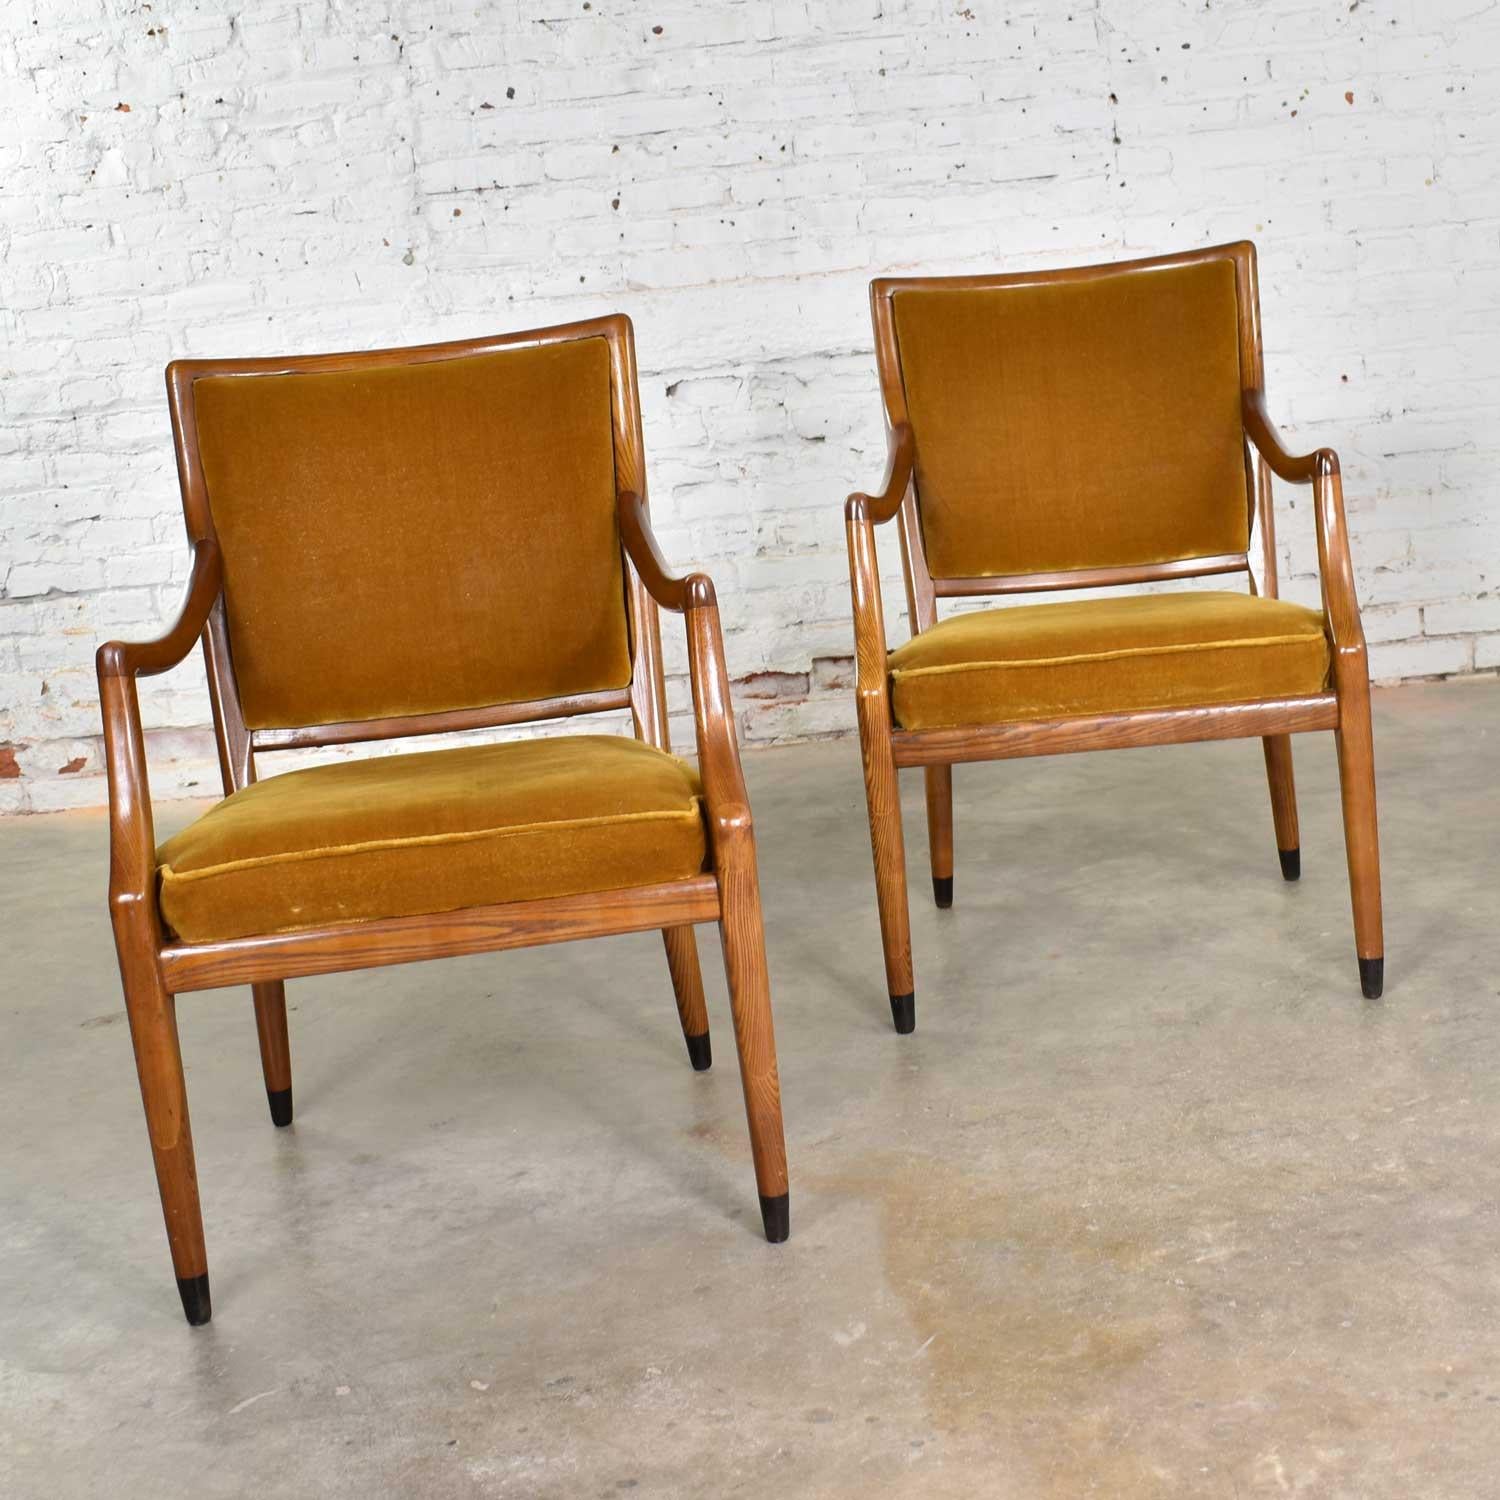 Handsome pair of MCM, or Mid-Century Modern, Grand Haven accent armchairs designed by Jack Van der Molen for Jamestown Lounge Company. They wear their original gold velvet upholstery and are done in light oak. They are in fabulous vintage condition.